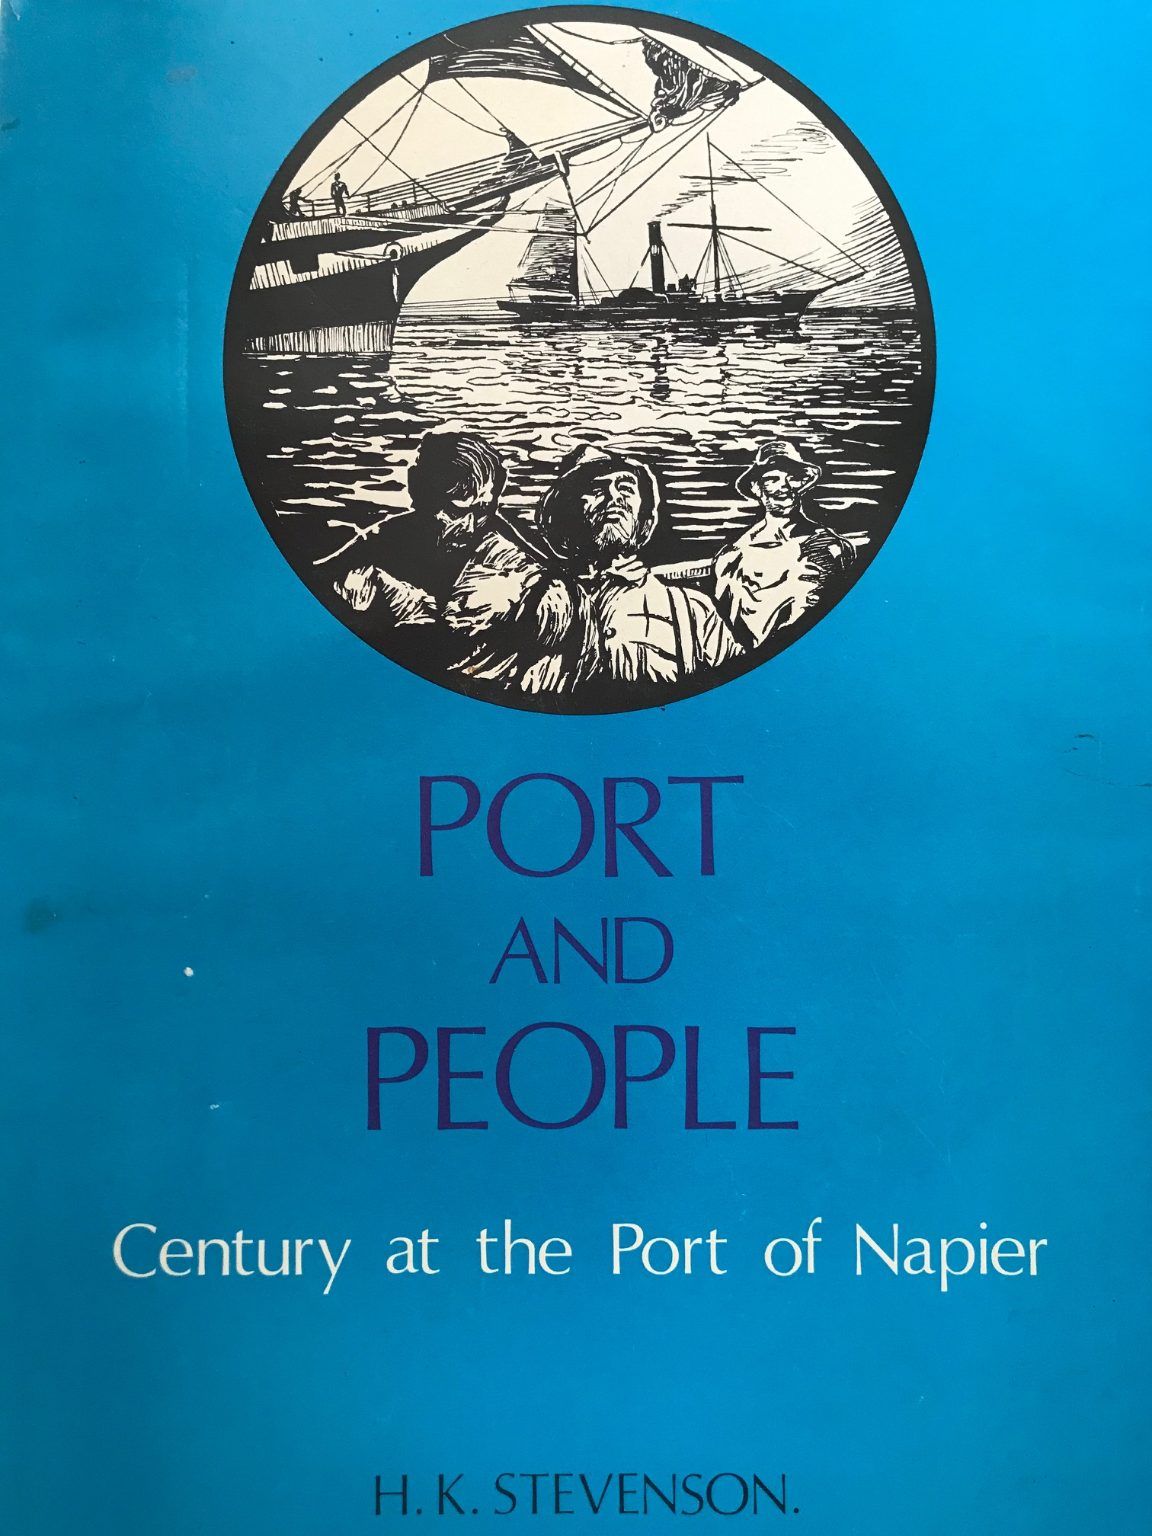 PORT AND PEOPLE: Century at The Port of Napier